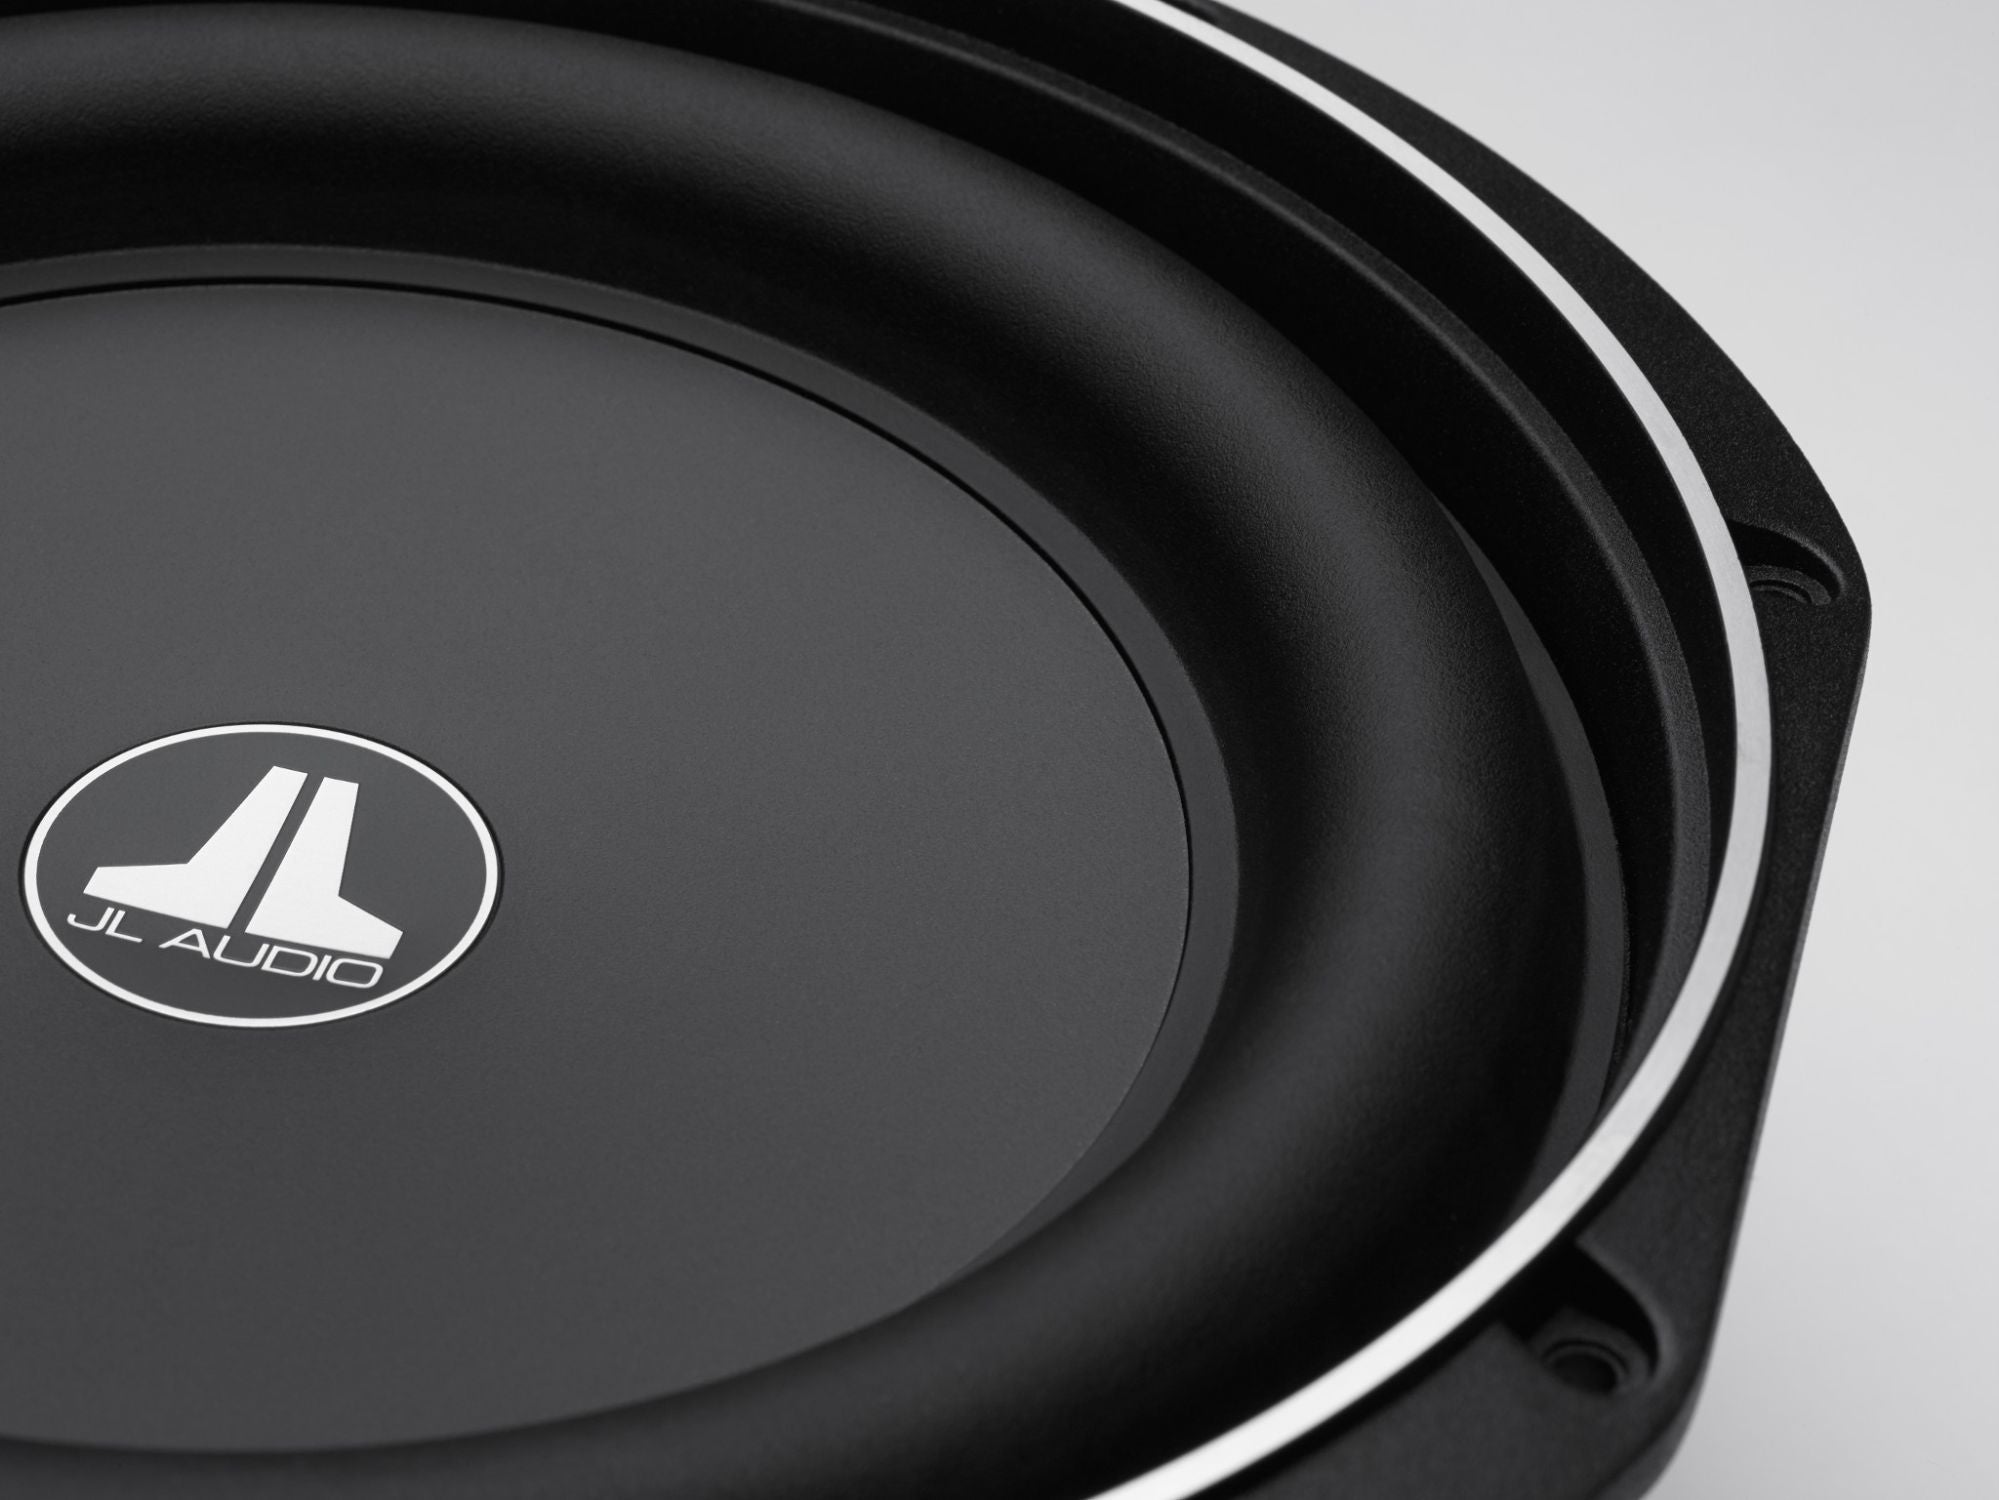 Detail of 10TW1 Subwoofer showing Frame and Surround from Front Edge